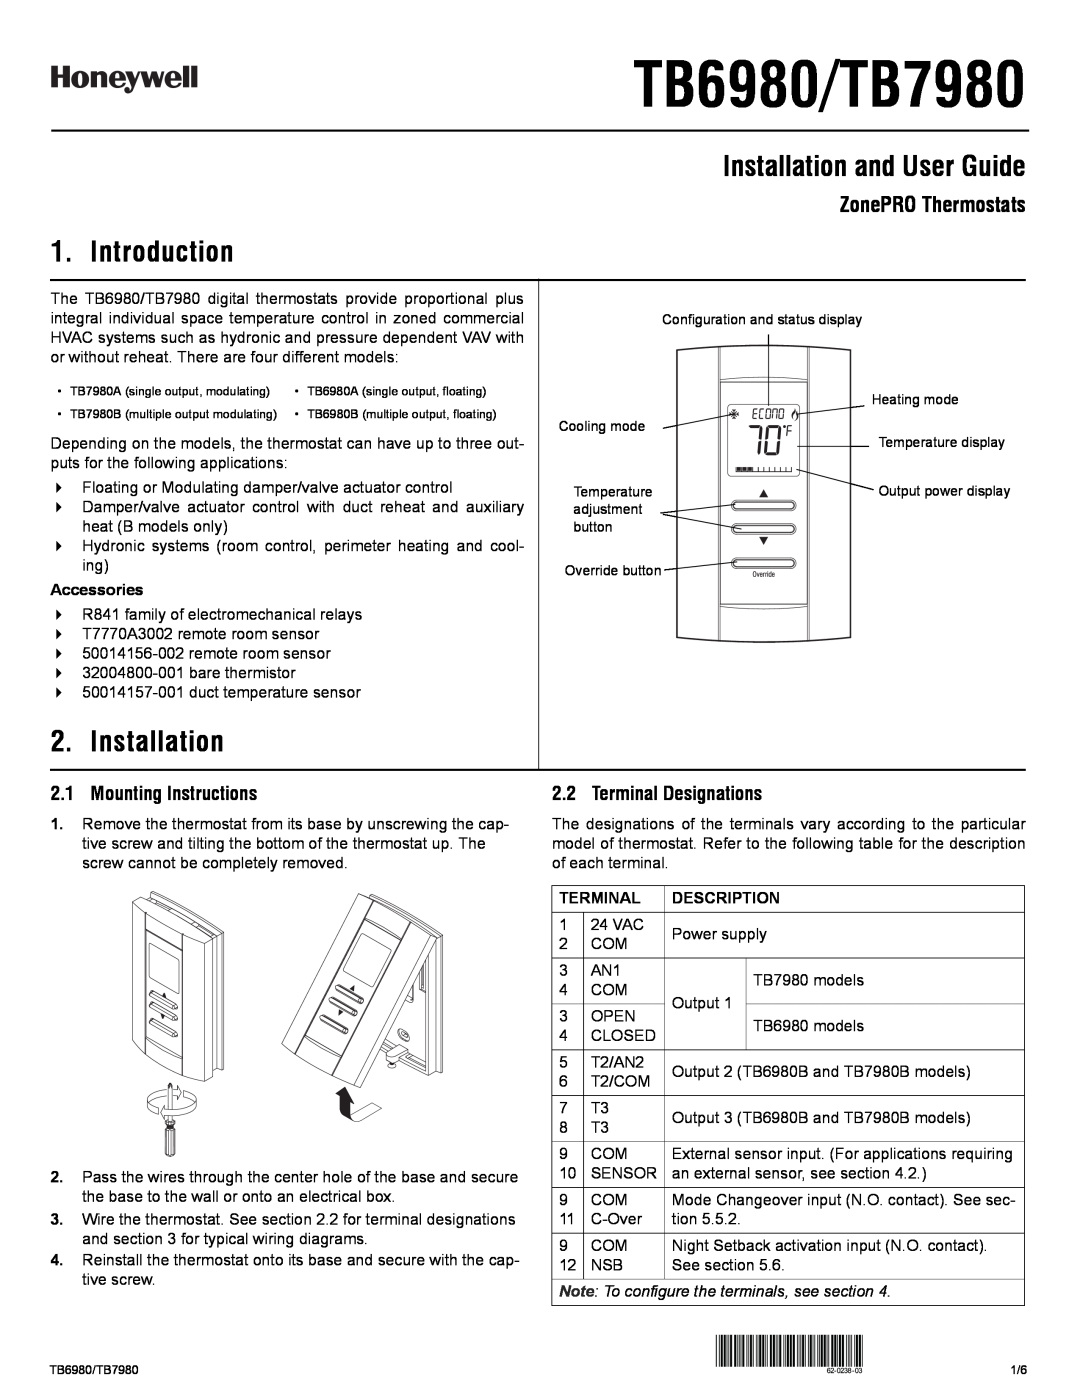 Honeywell TB6980, TB7980 manual Installation and User Guide, Introduction, Mounting Instructions, Terminal Designations 